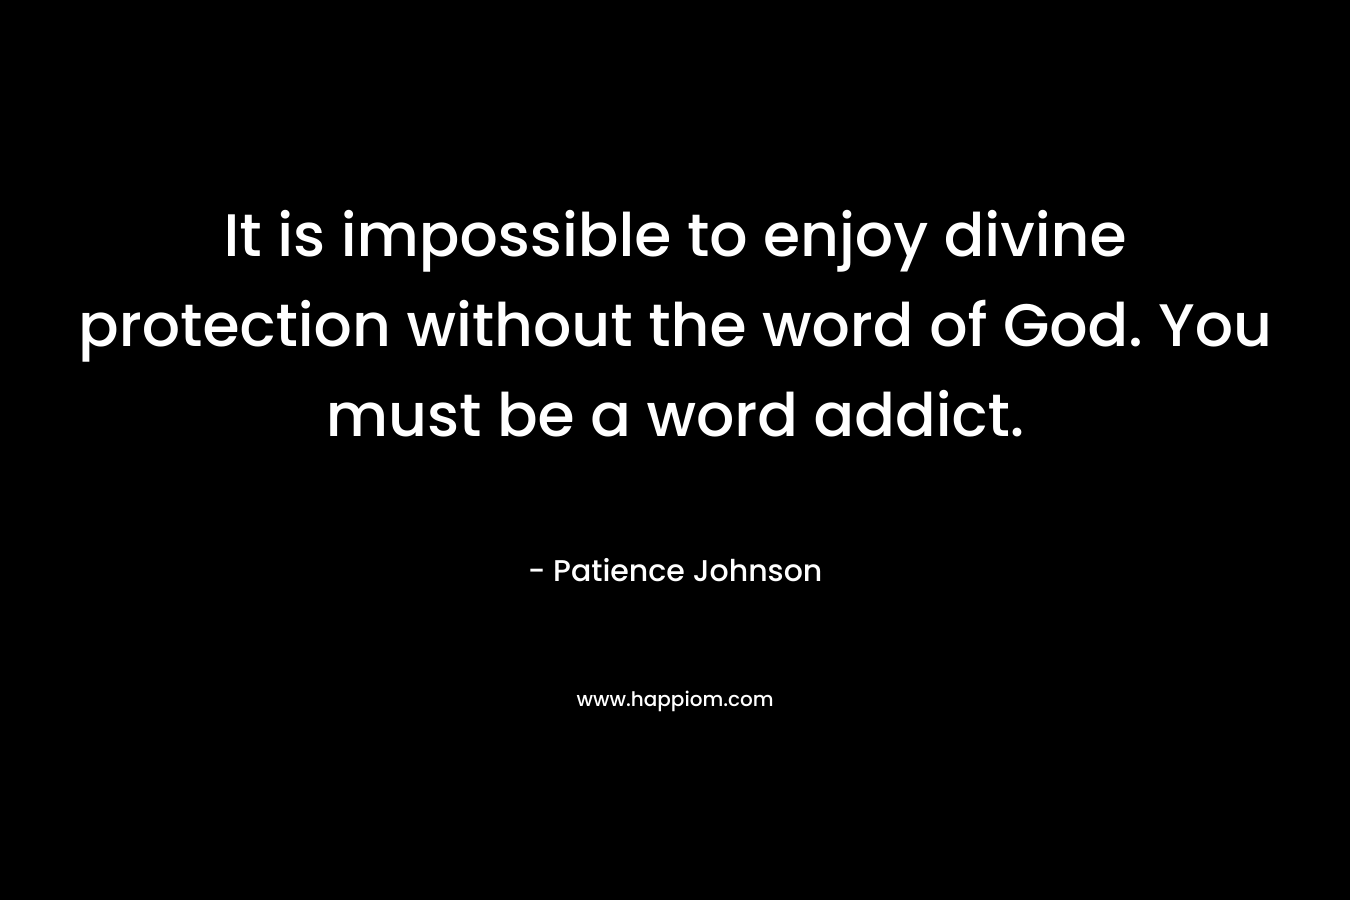 It is impossible to enjoy divine protection without the word of God. You must be a word addict.